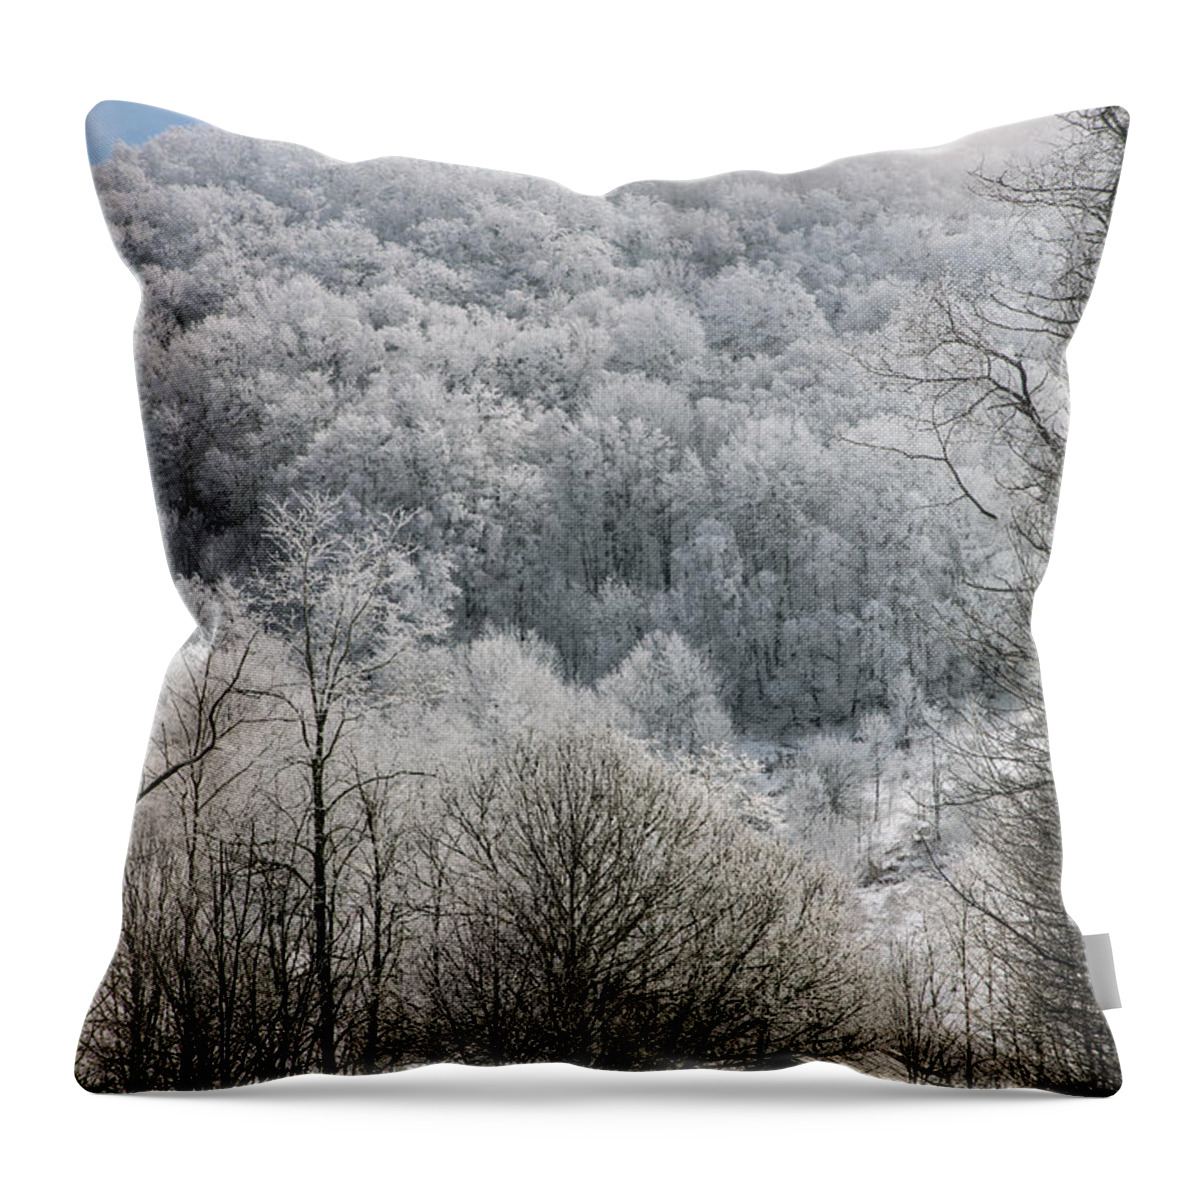 Snow Throw Pillow featuring the photograph Waiting Out Winter by John Haldane